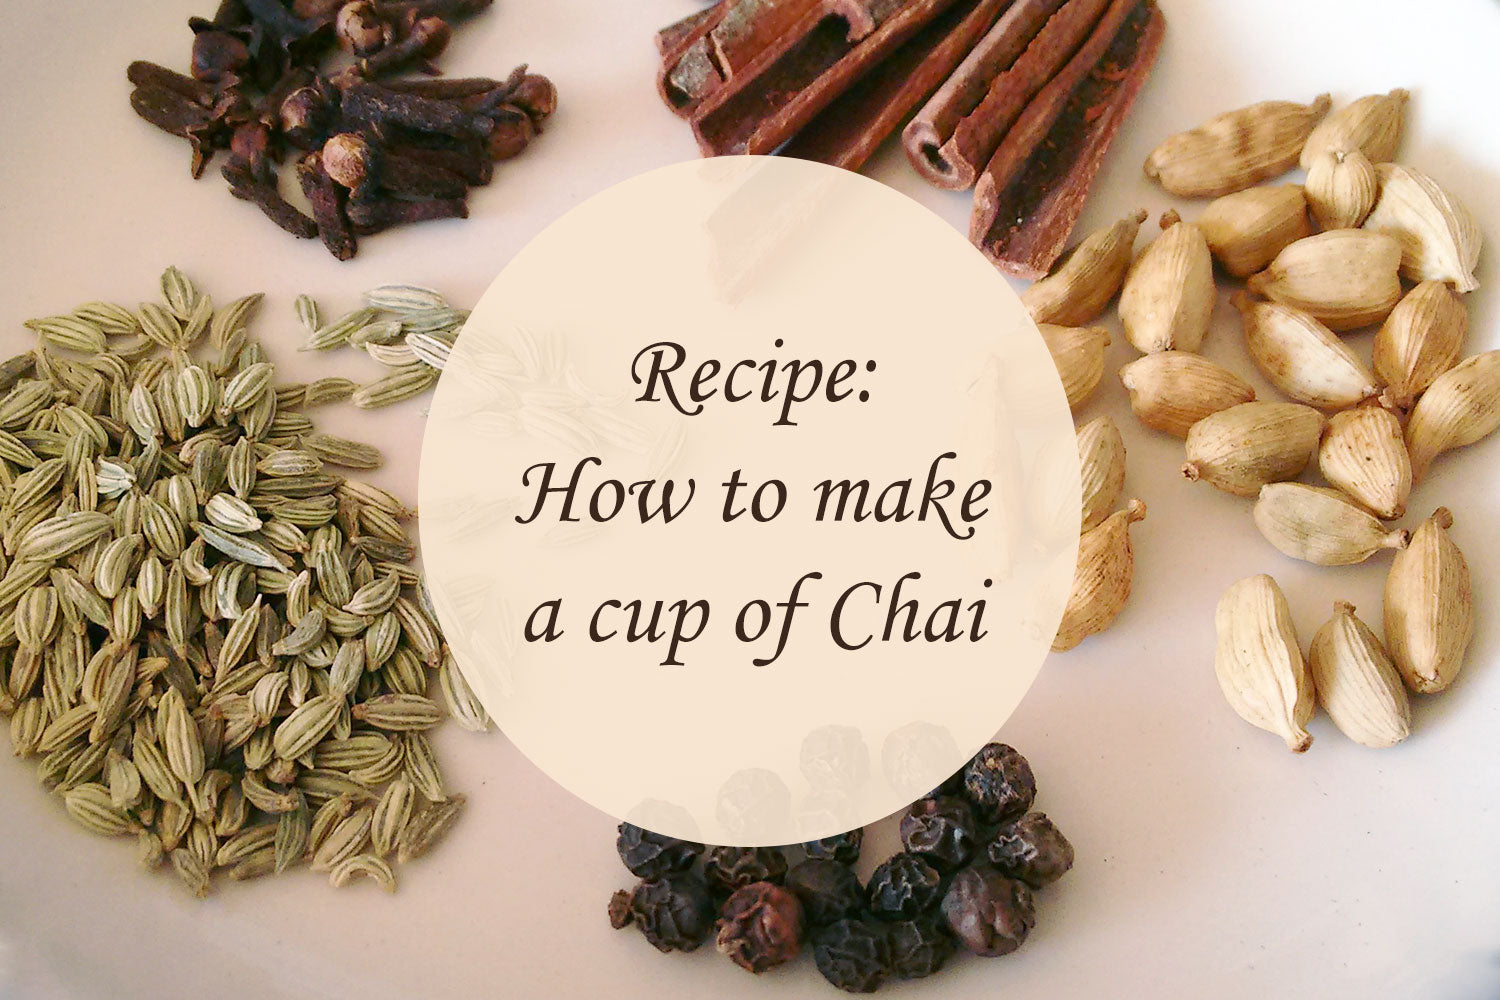 Recipe: How to make a cup of Chai